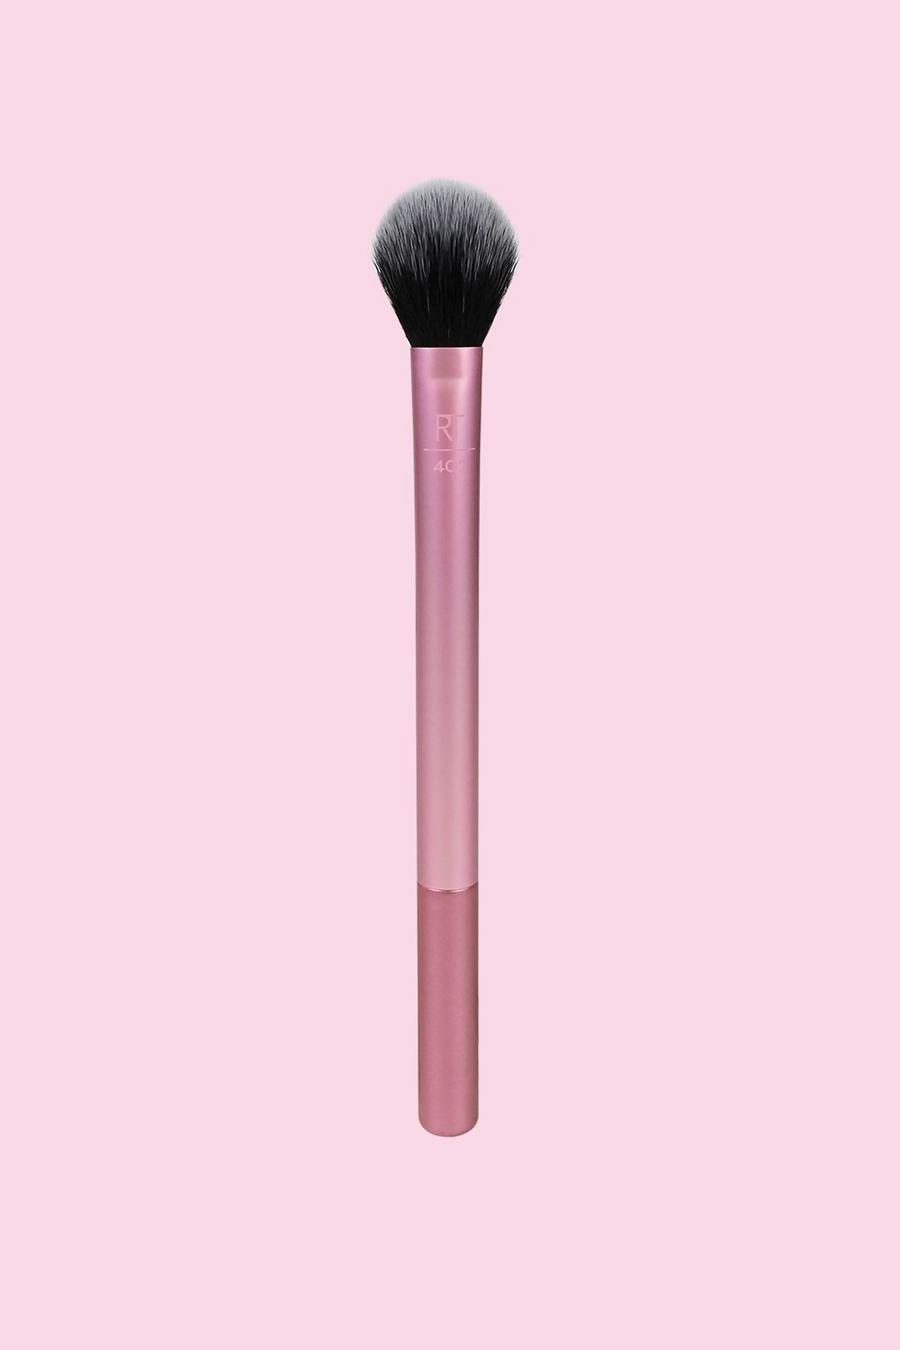 Pink rosa REAL TECHNIQUES UNDER EYE SETTING POWDER MAKEUP BRUSH